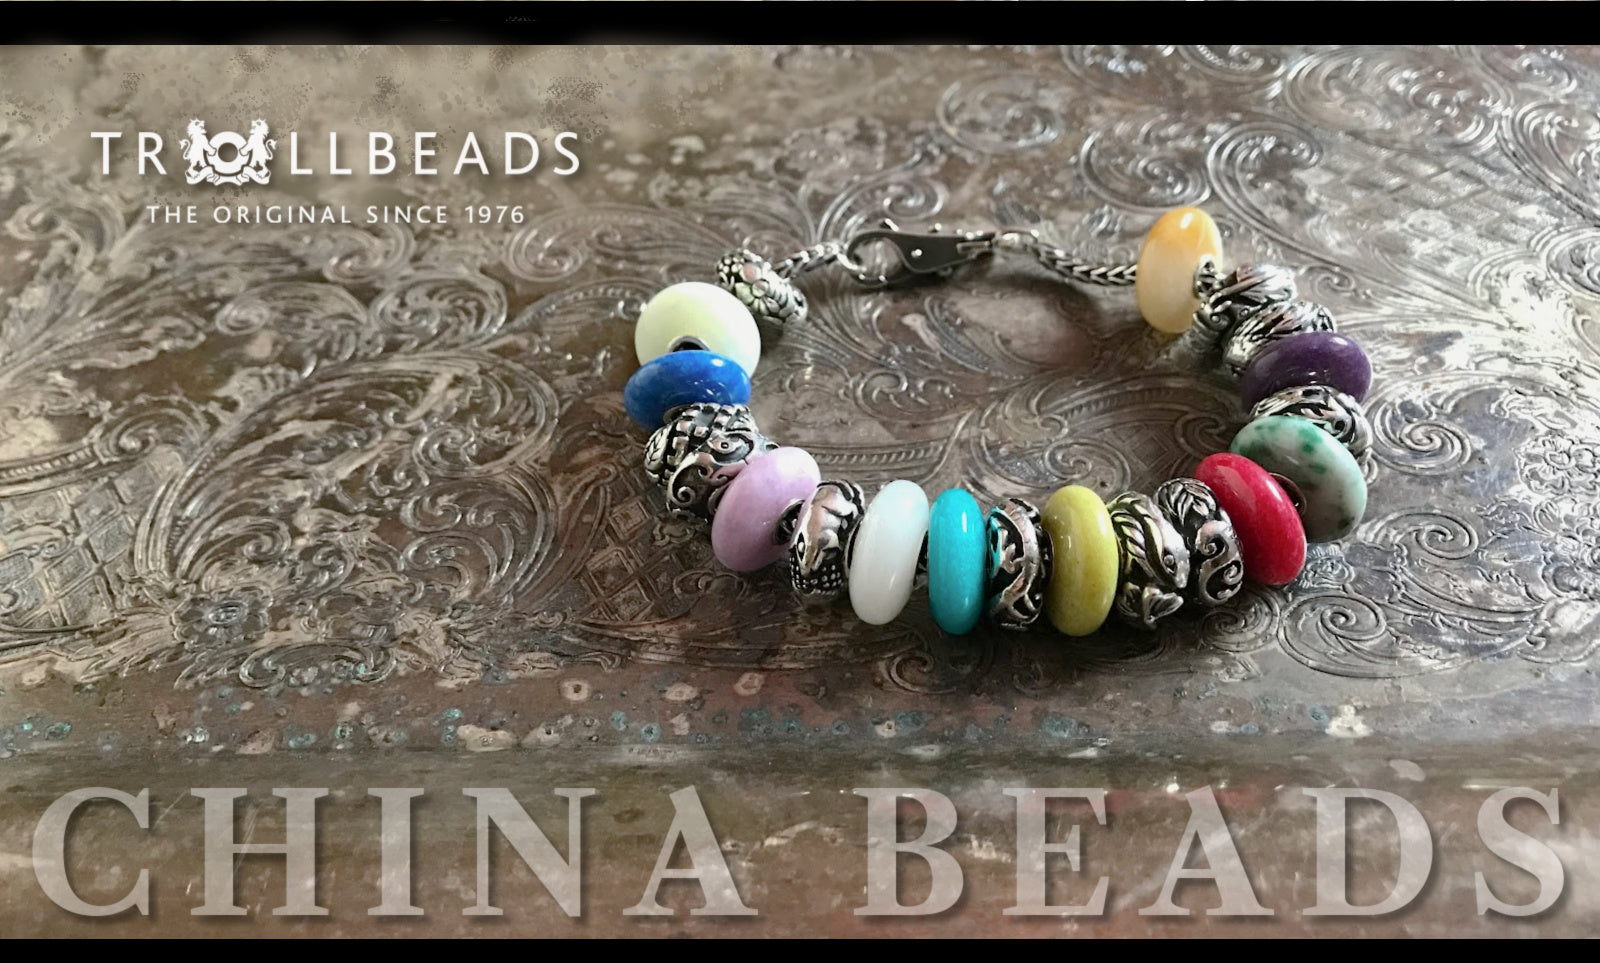 Suzie Q Studio in Calgary is offering two extremely rare Trollbeads Limited Edition China Beads Sets: one of 10 sterling silver and 10 jade beads and one of 10 sterling silver beads.